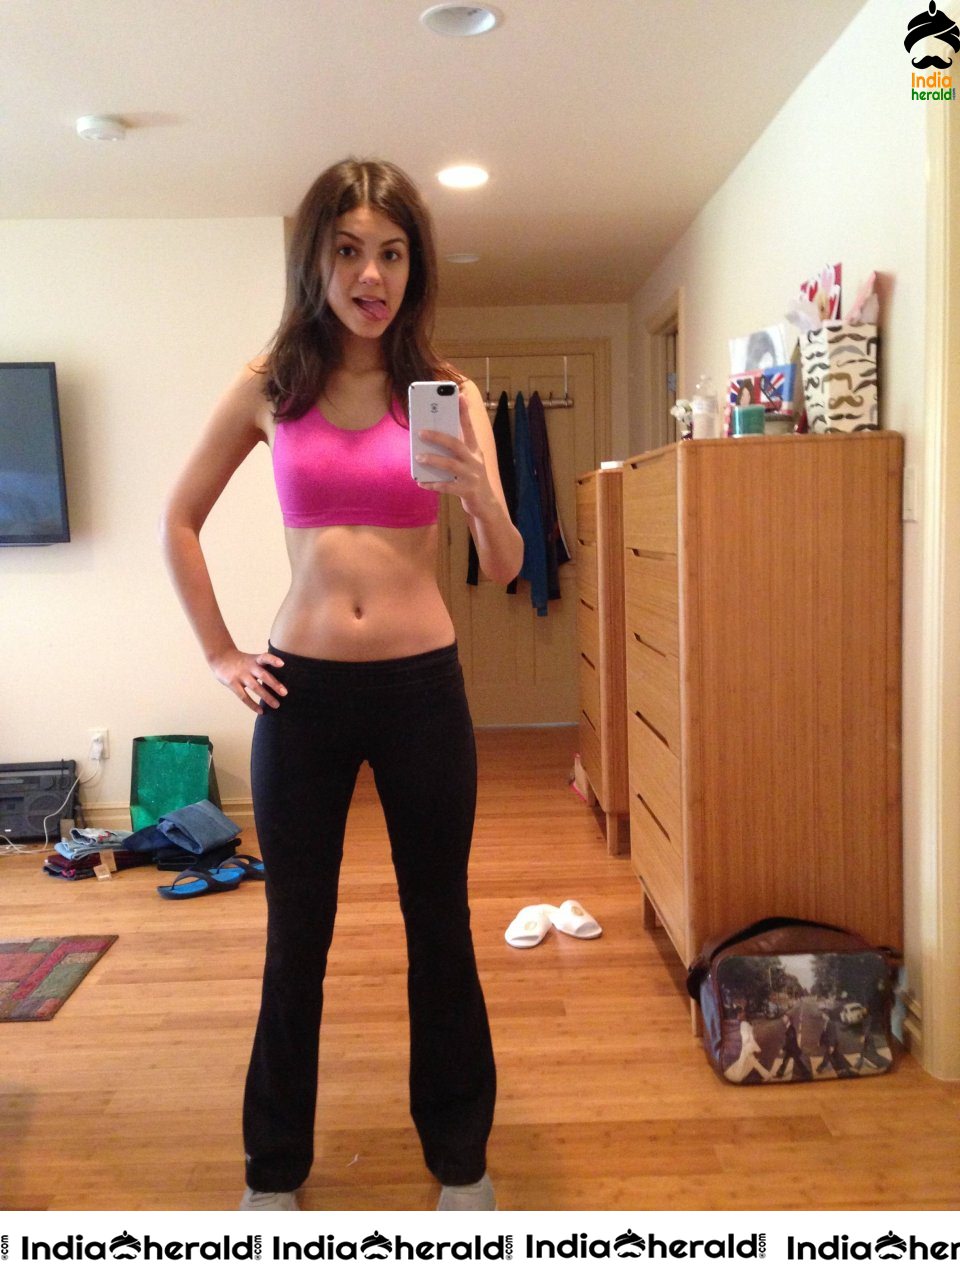 Victoria Justice LEAKED PRIVATE HOT TOPLESS EXPOSING PHOTOS Set 2